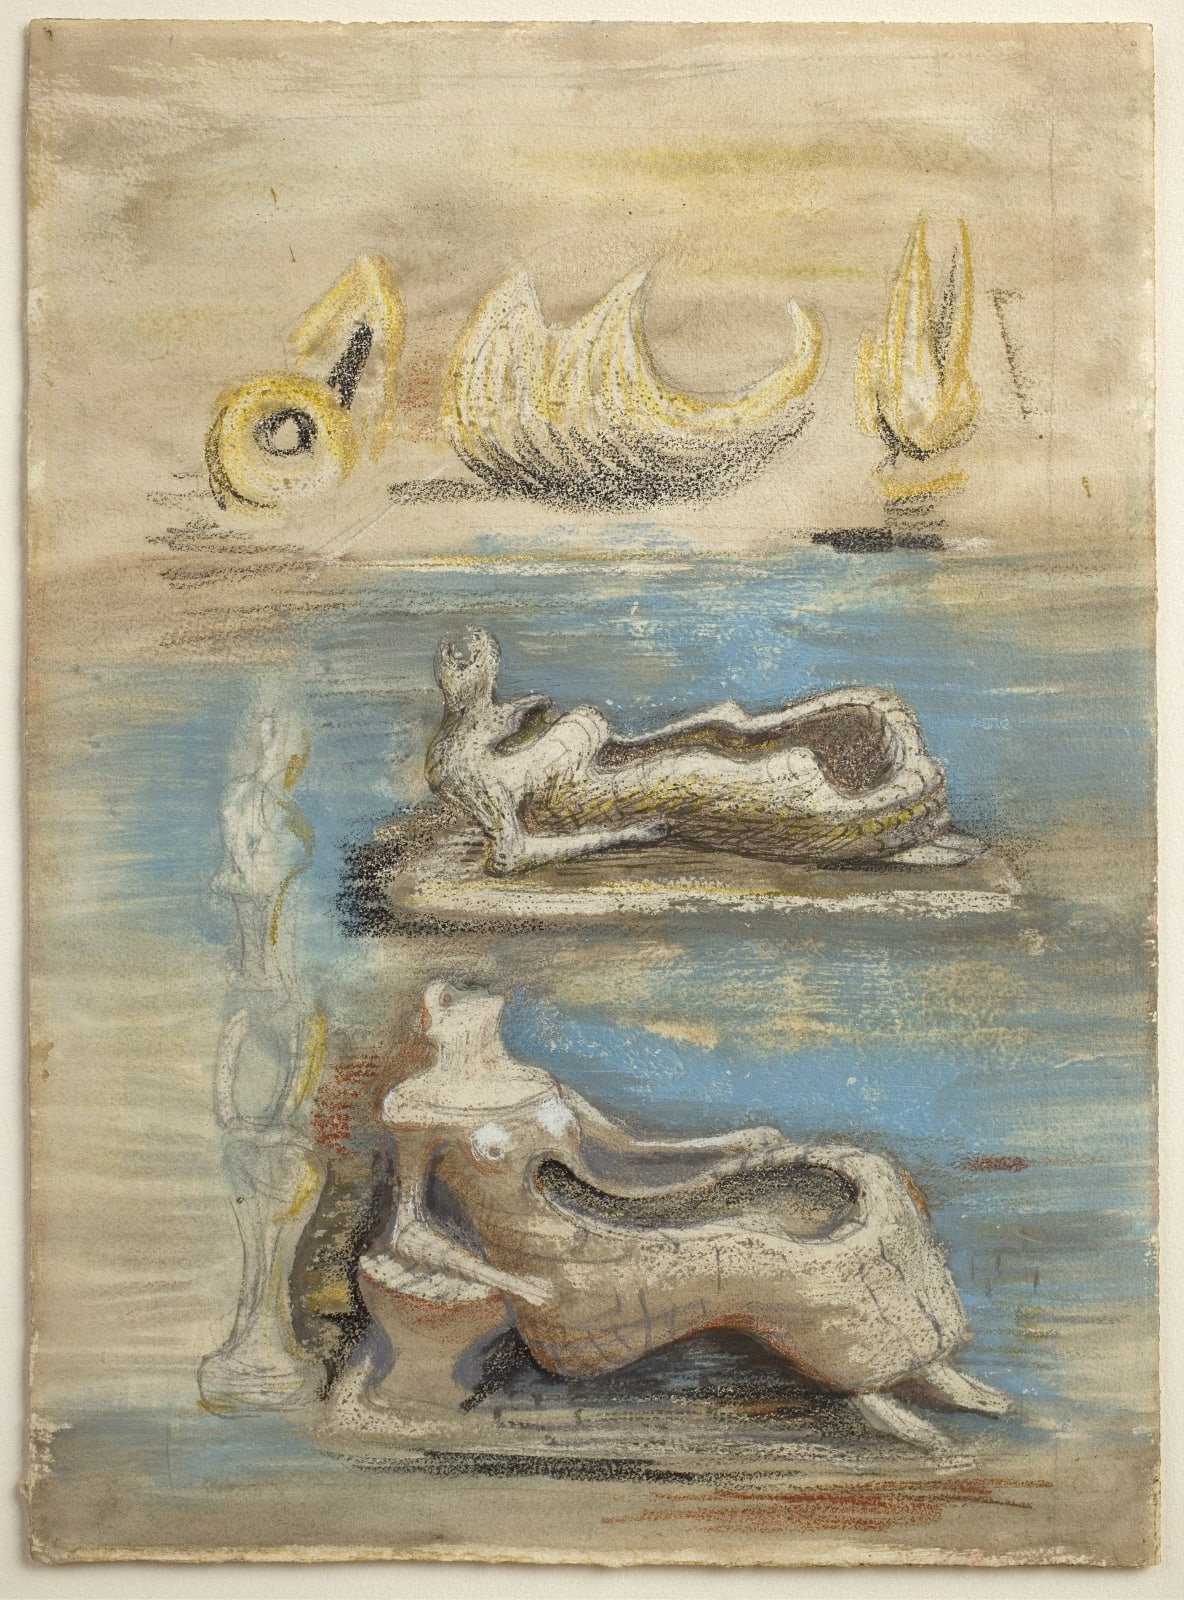 Henry Moore, A Land: His Lines Follow Life Back into the Stone, 1950